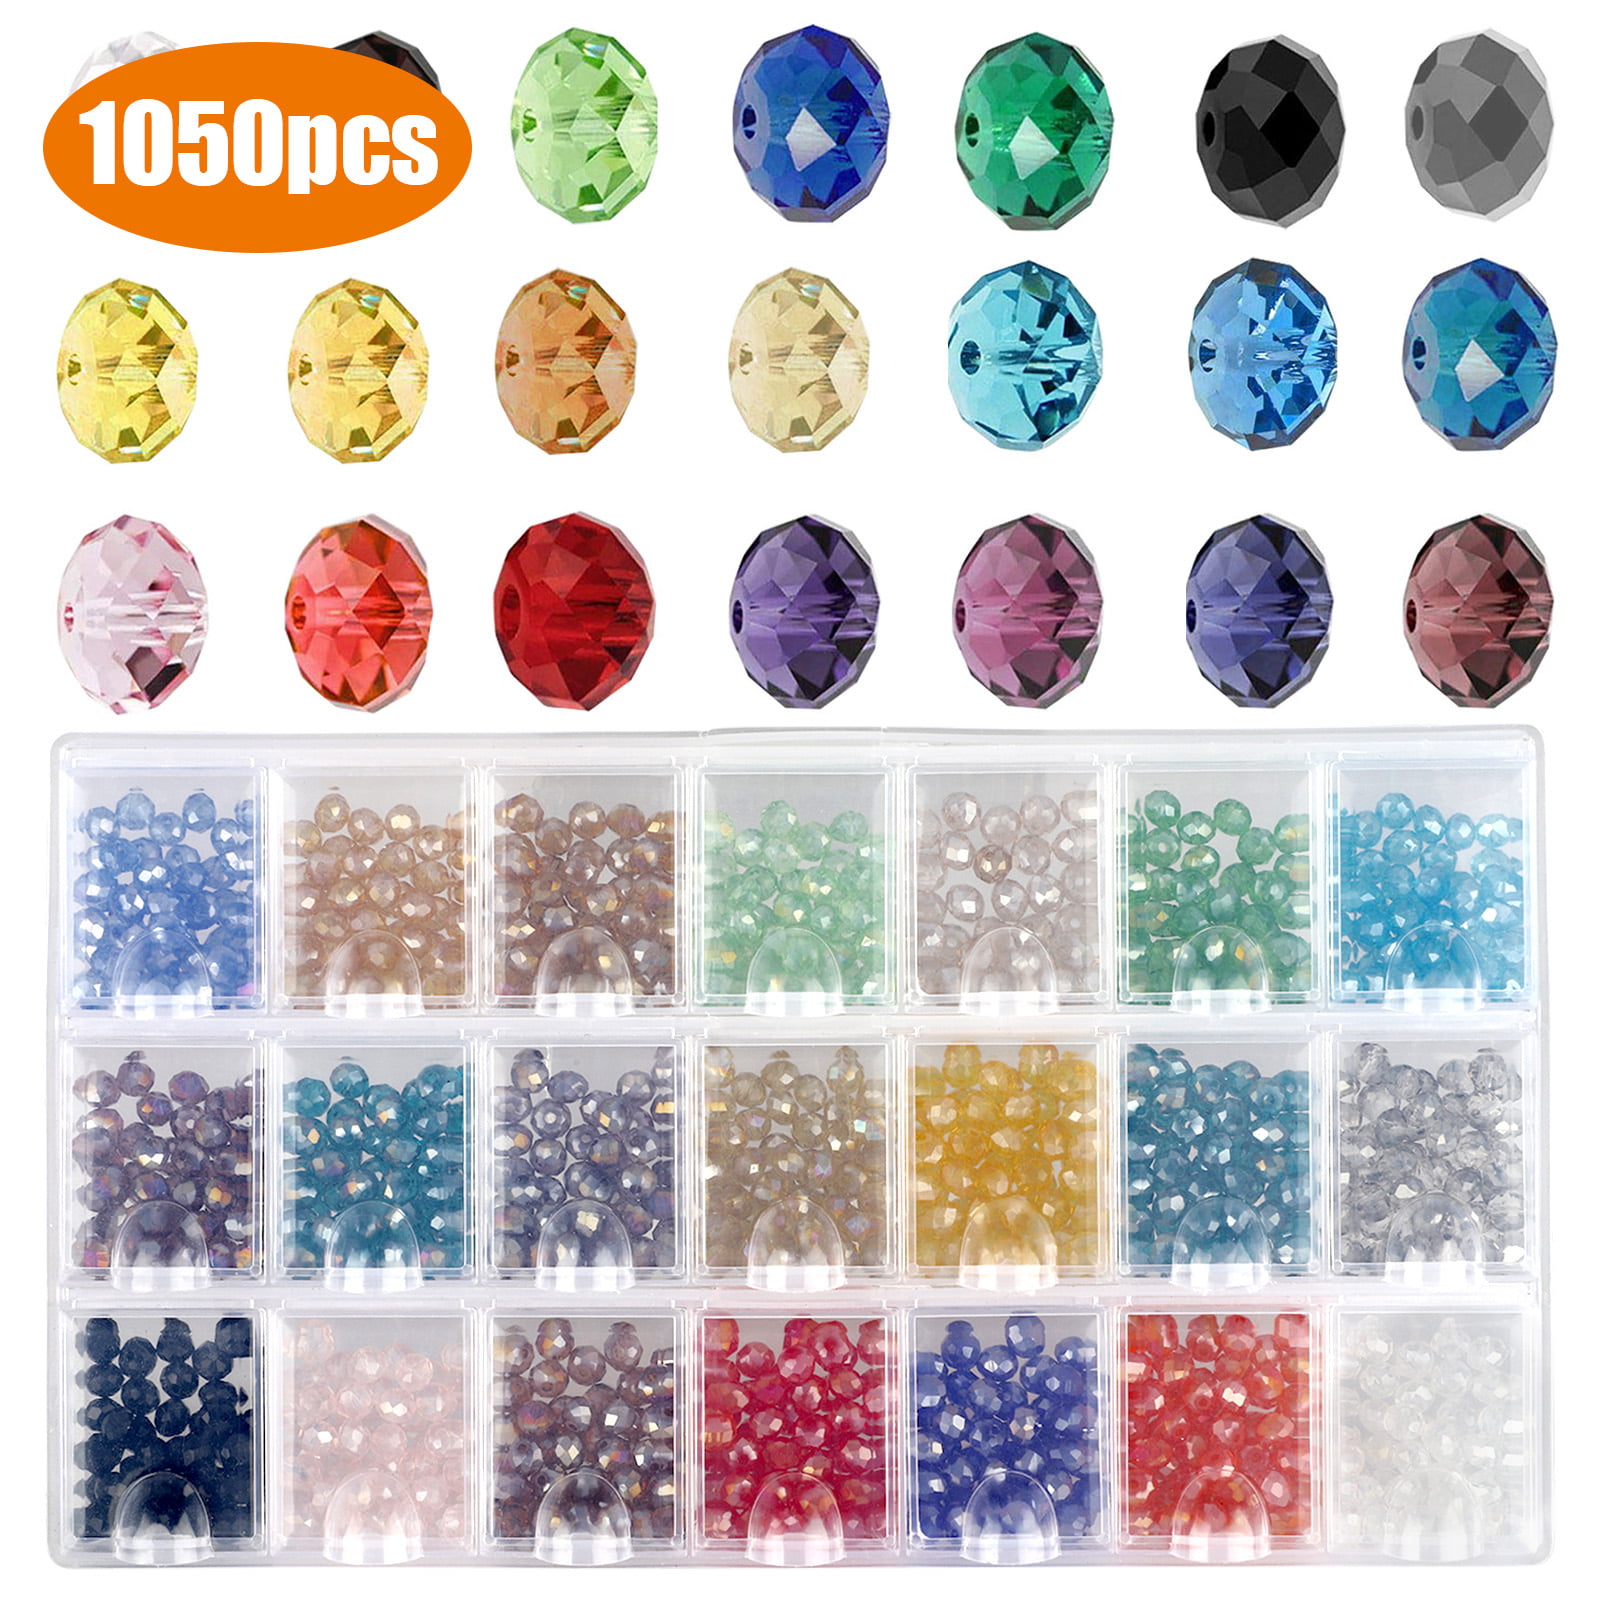 1000pcs 2mm Czech Glass Beads Seed Jewelry Spacer Loose Round Best Quality New